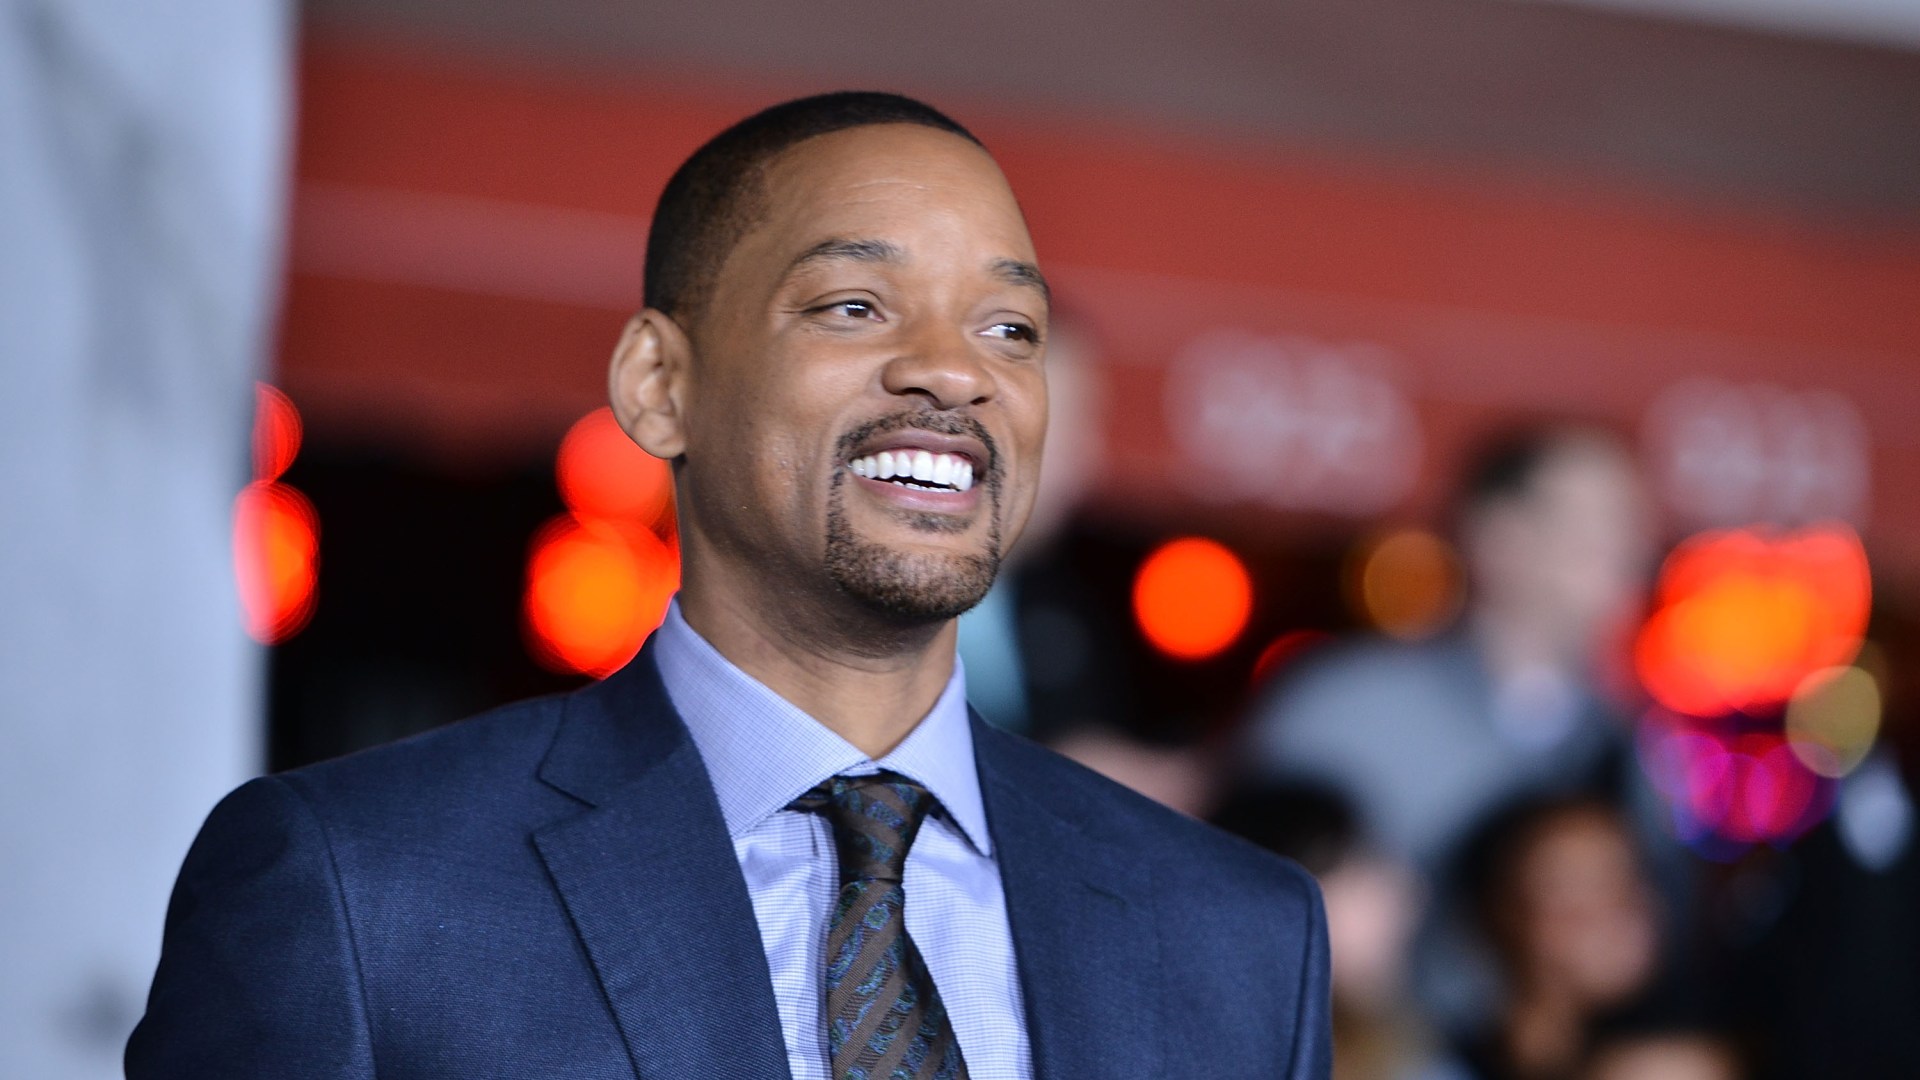 Is Will Smith a Scientologist? Here's What We Know About His Religion